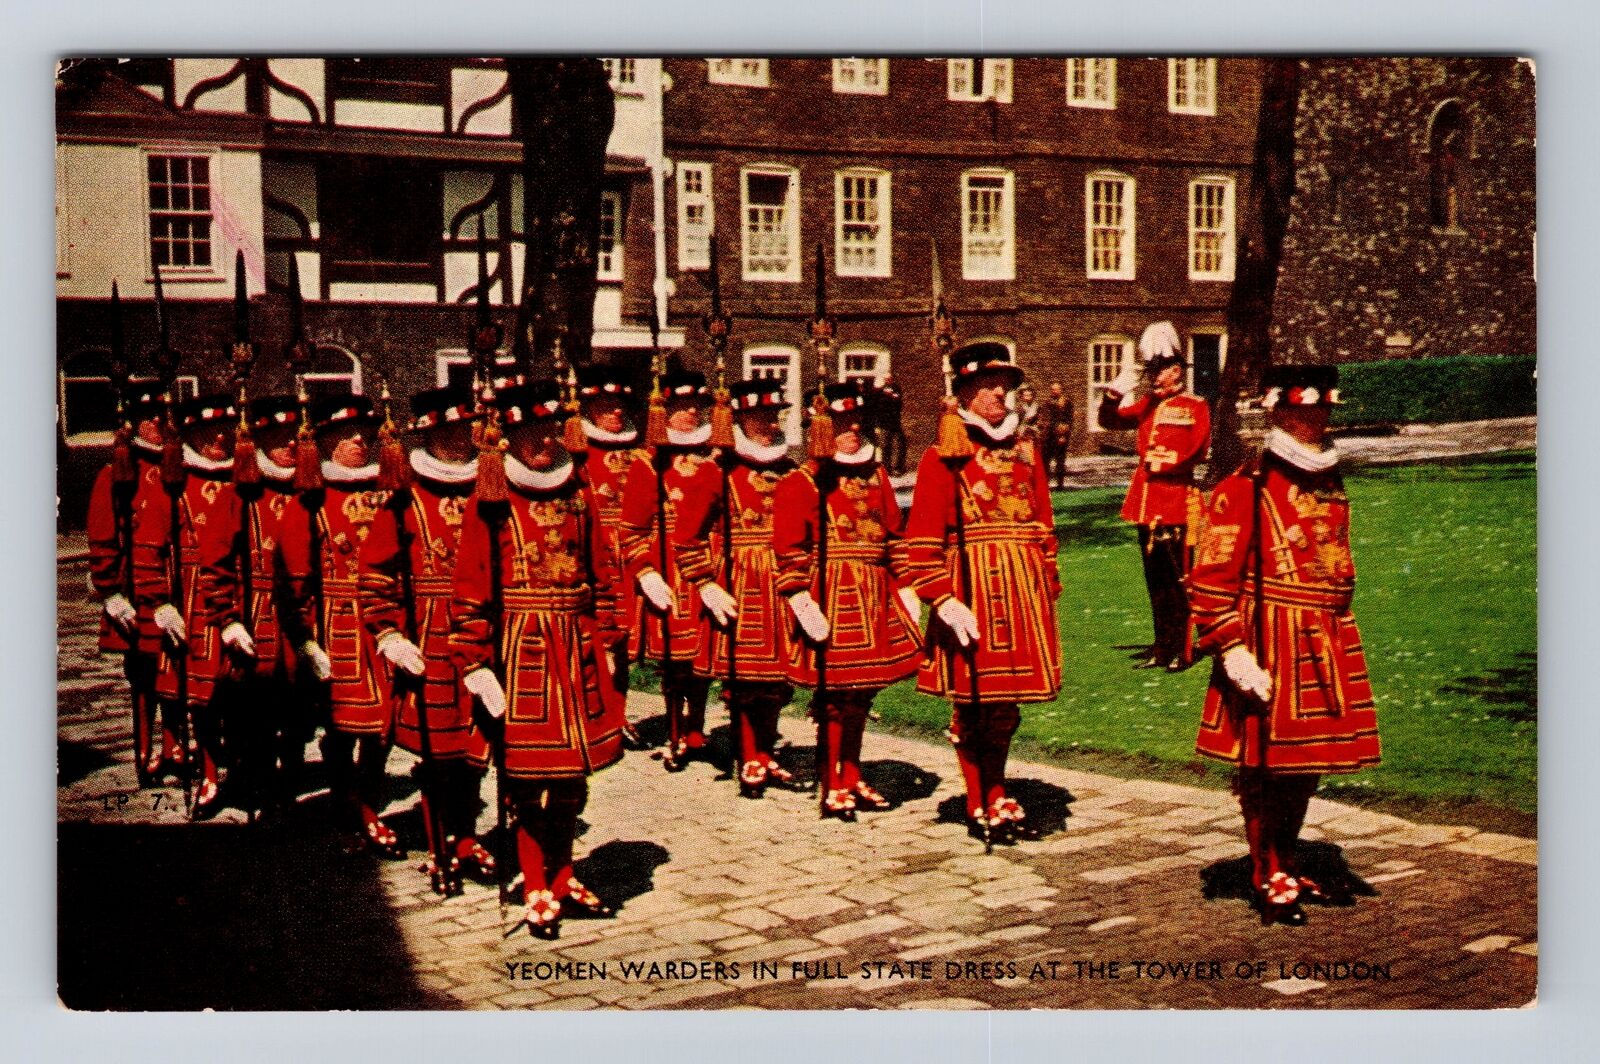 London England, Yeomen, Warders In Full State Dress, Tower, Vintage Postcard